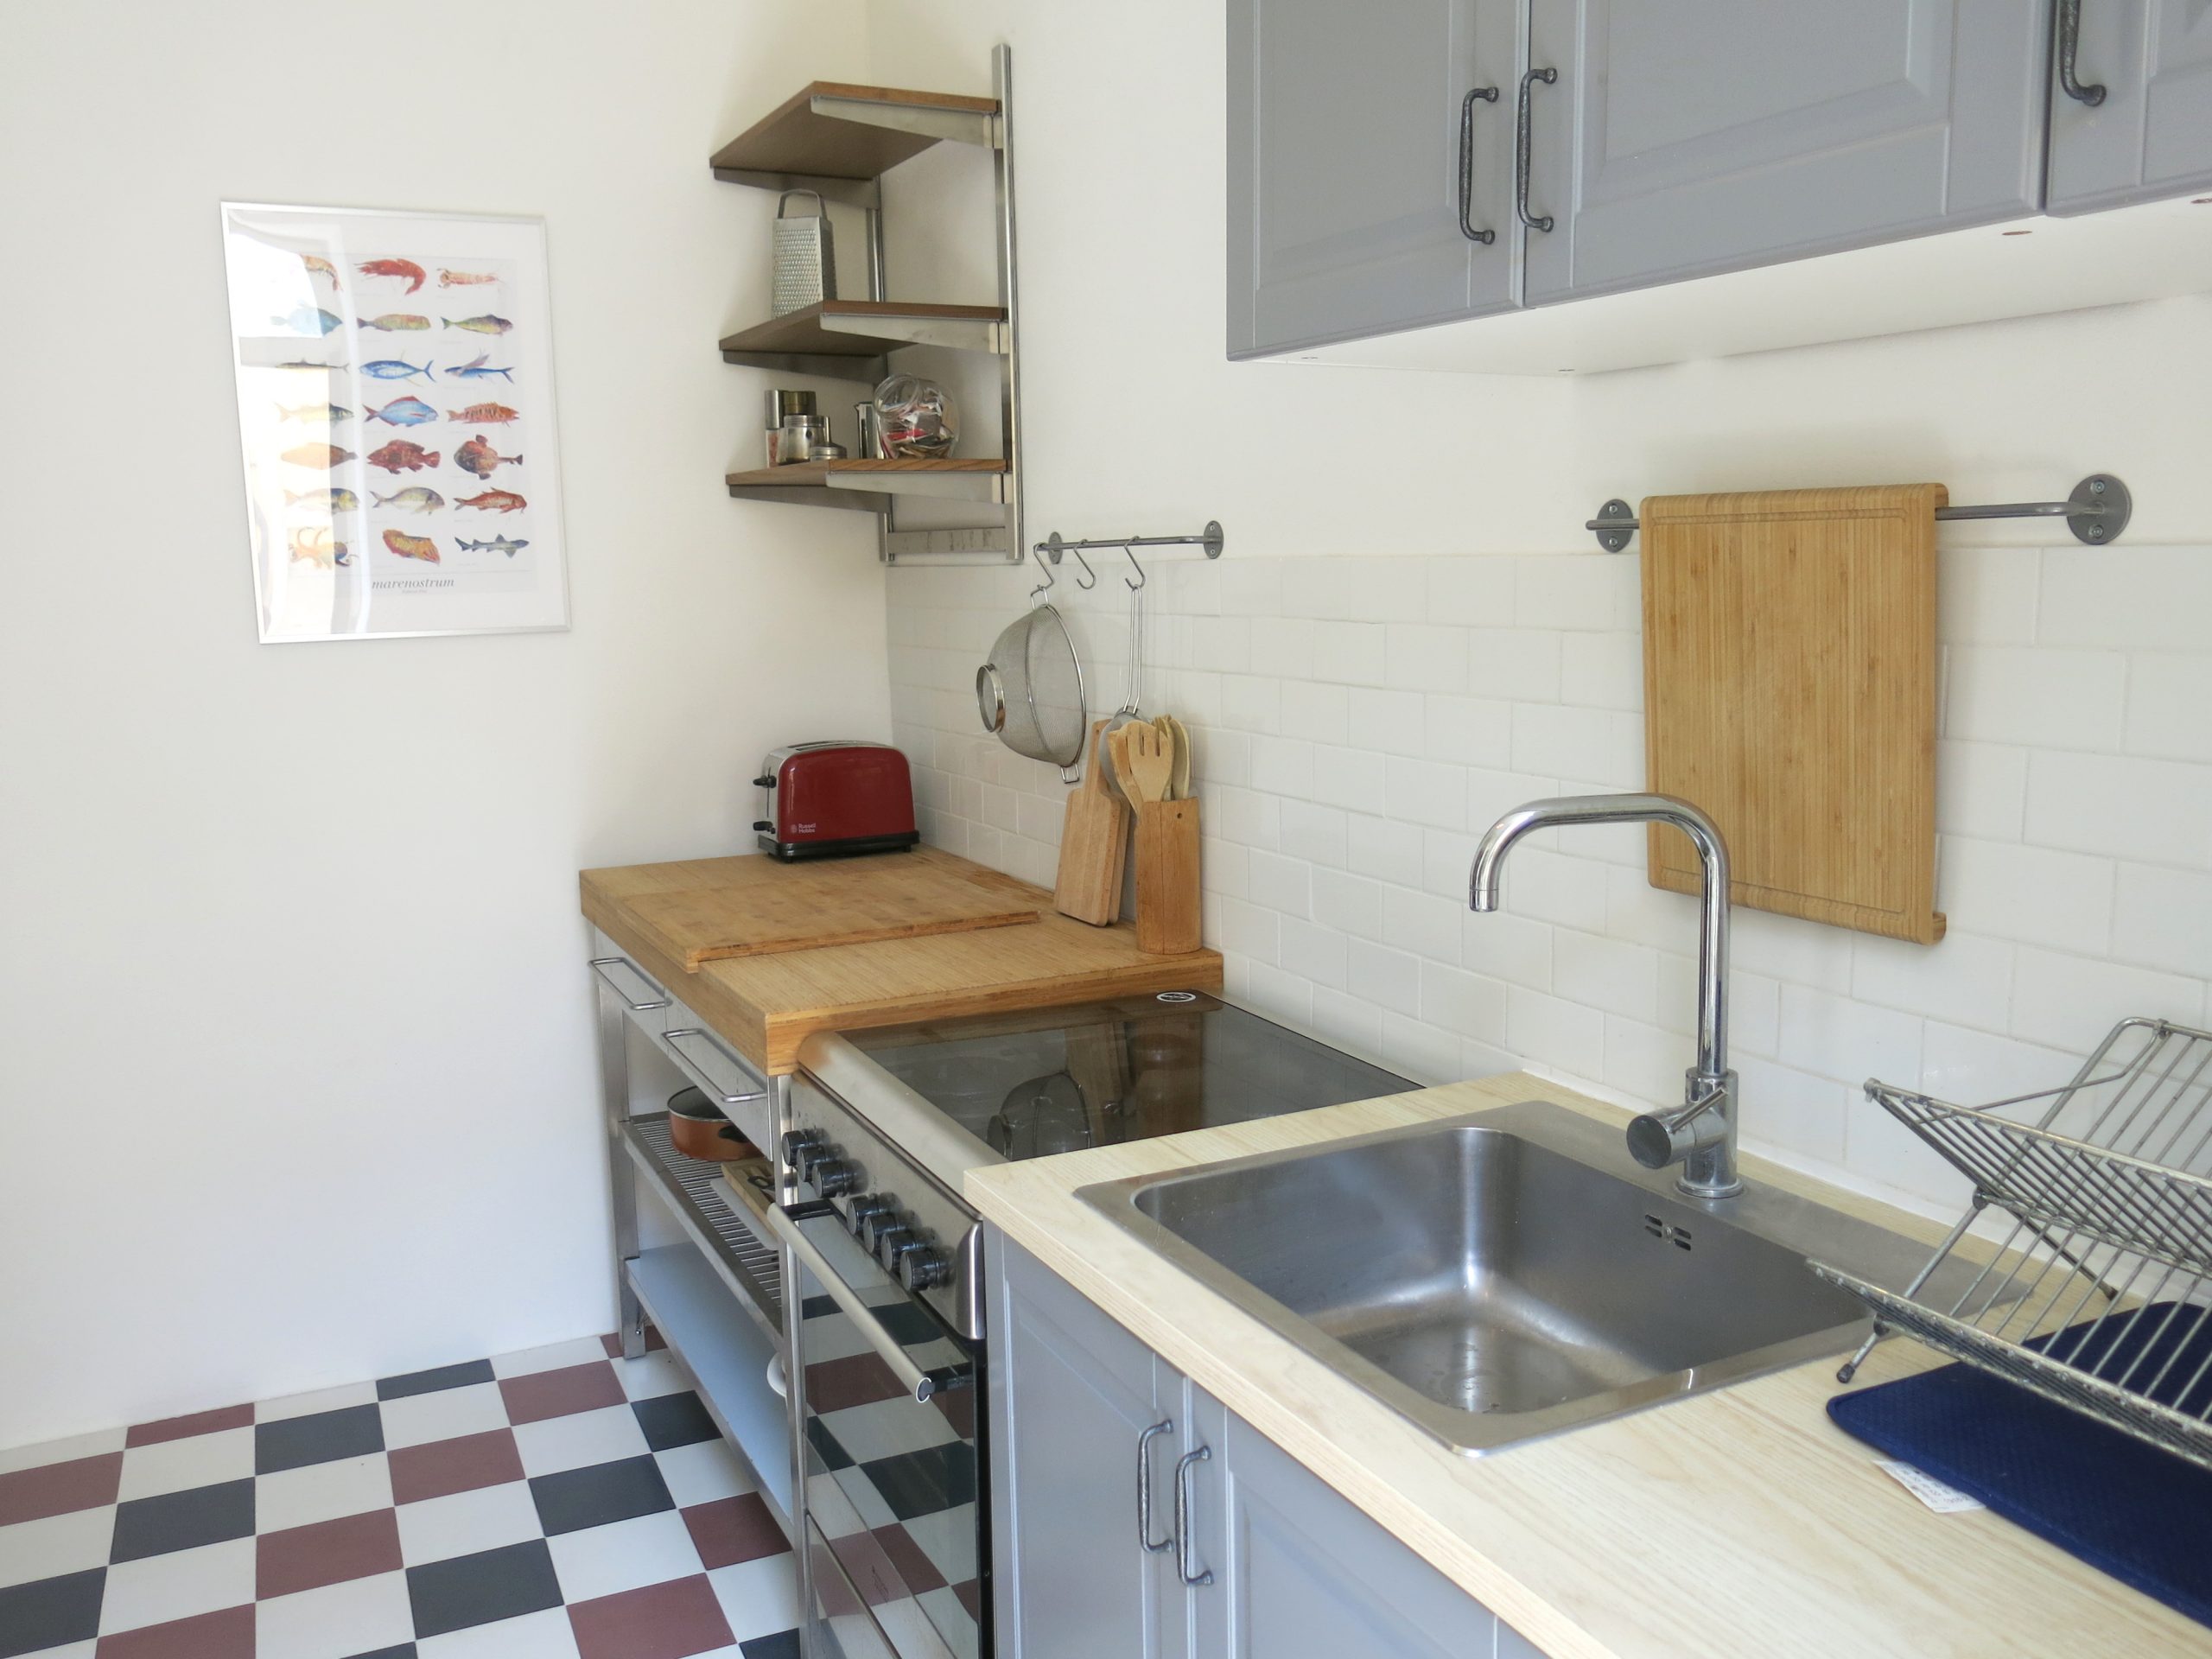 Apartment for rent in Siracusa- kitchen